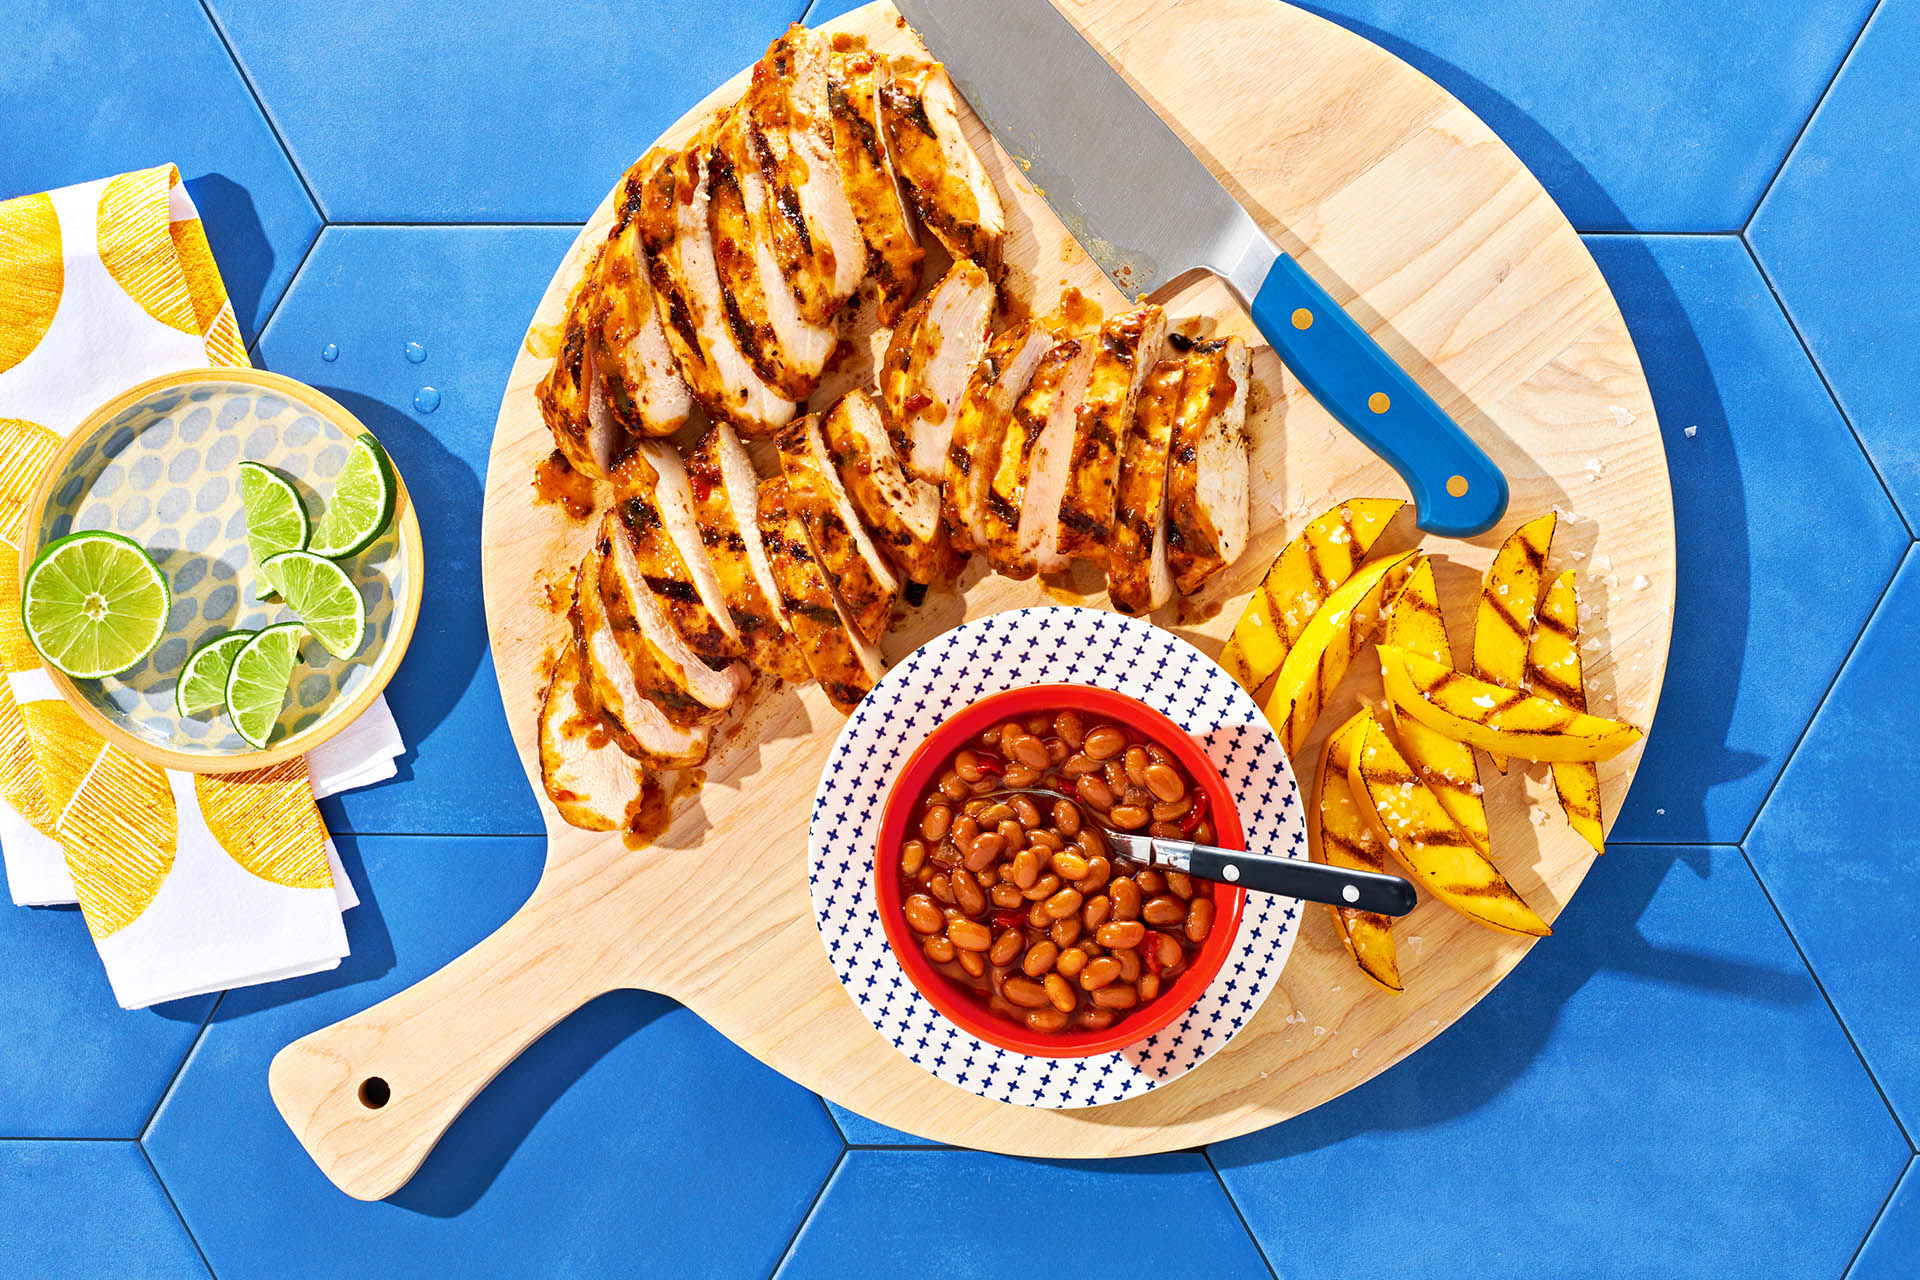 Wood platter with Mango Chipotle Chicken and a side of beans.